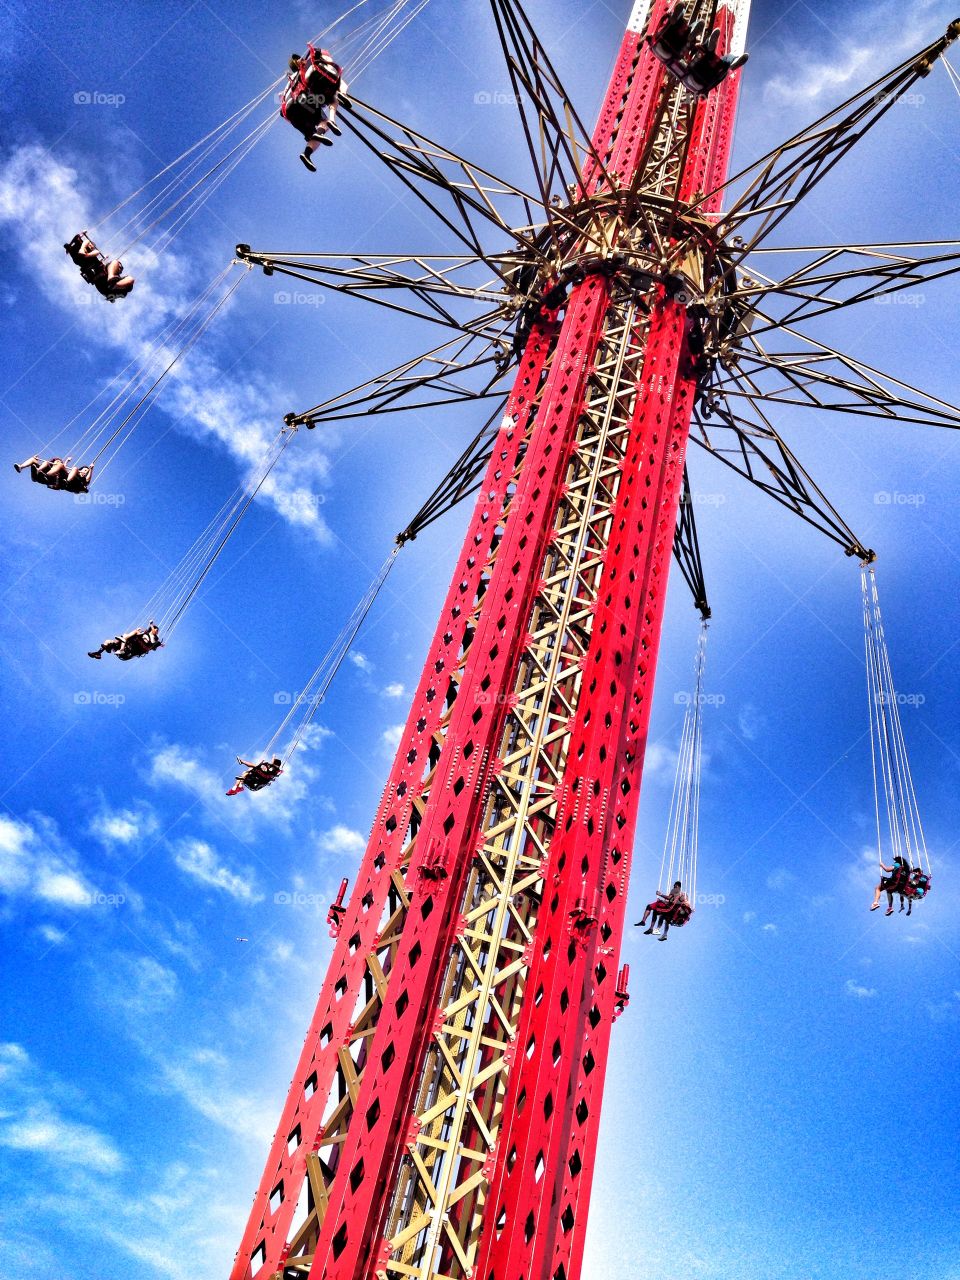 High in the sky. Sky screamer ride at six flags